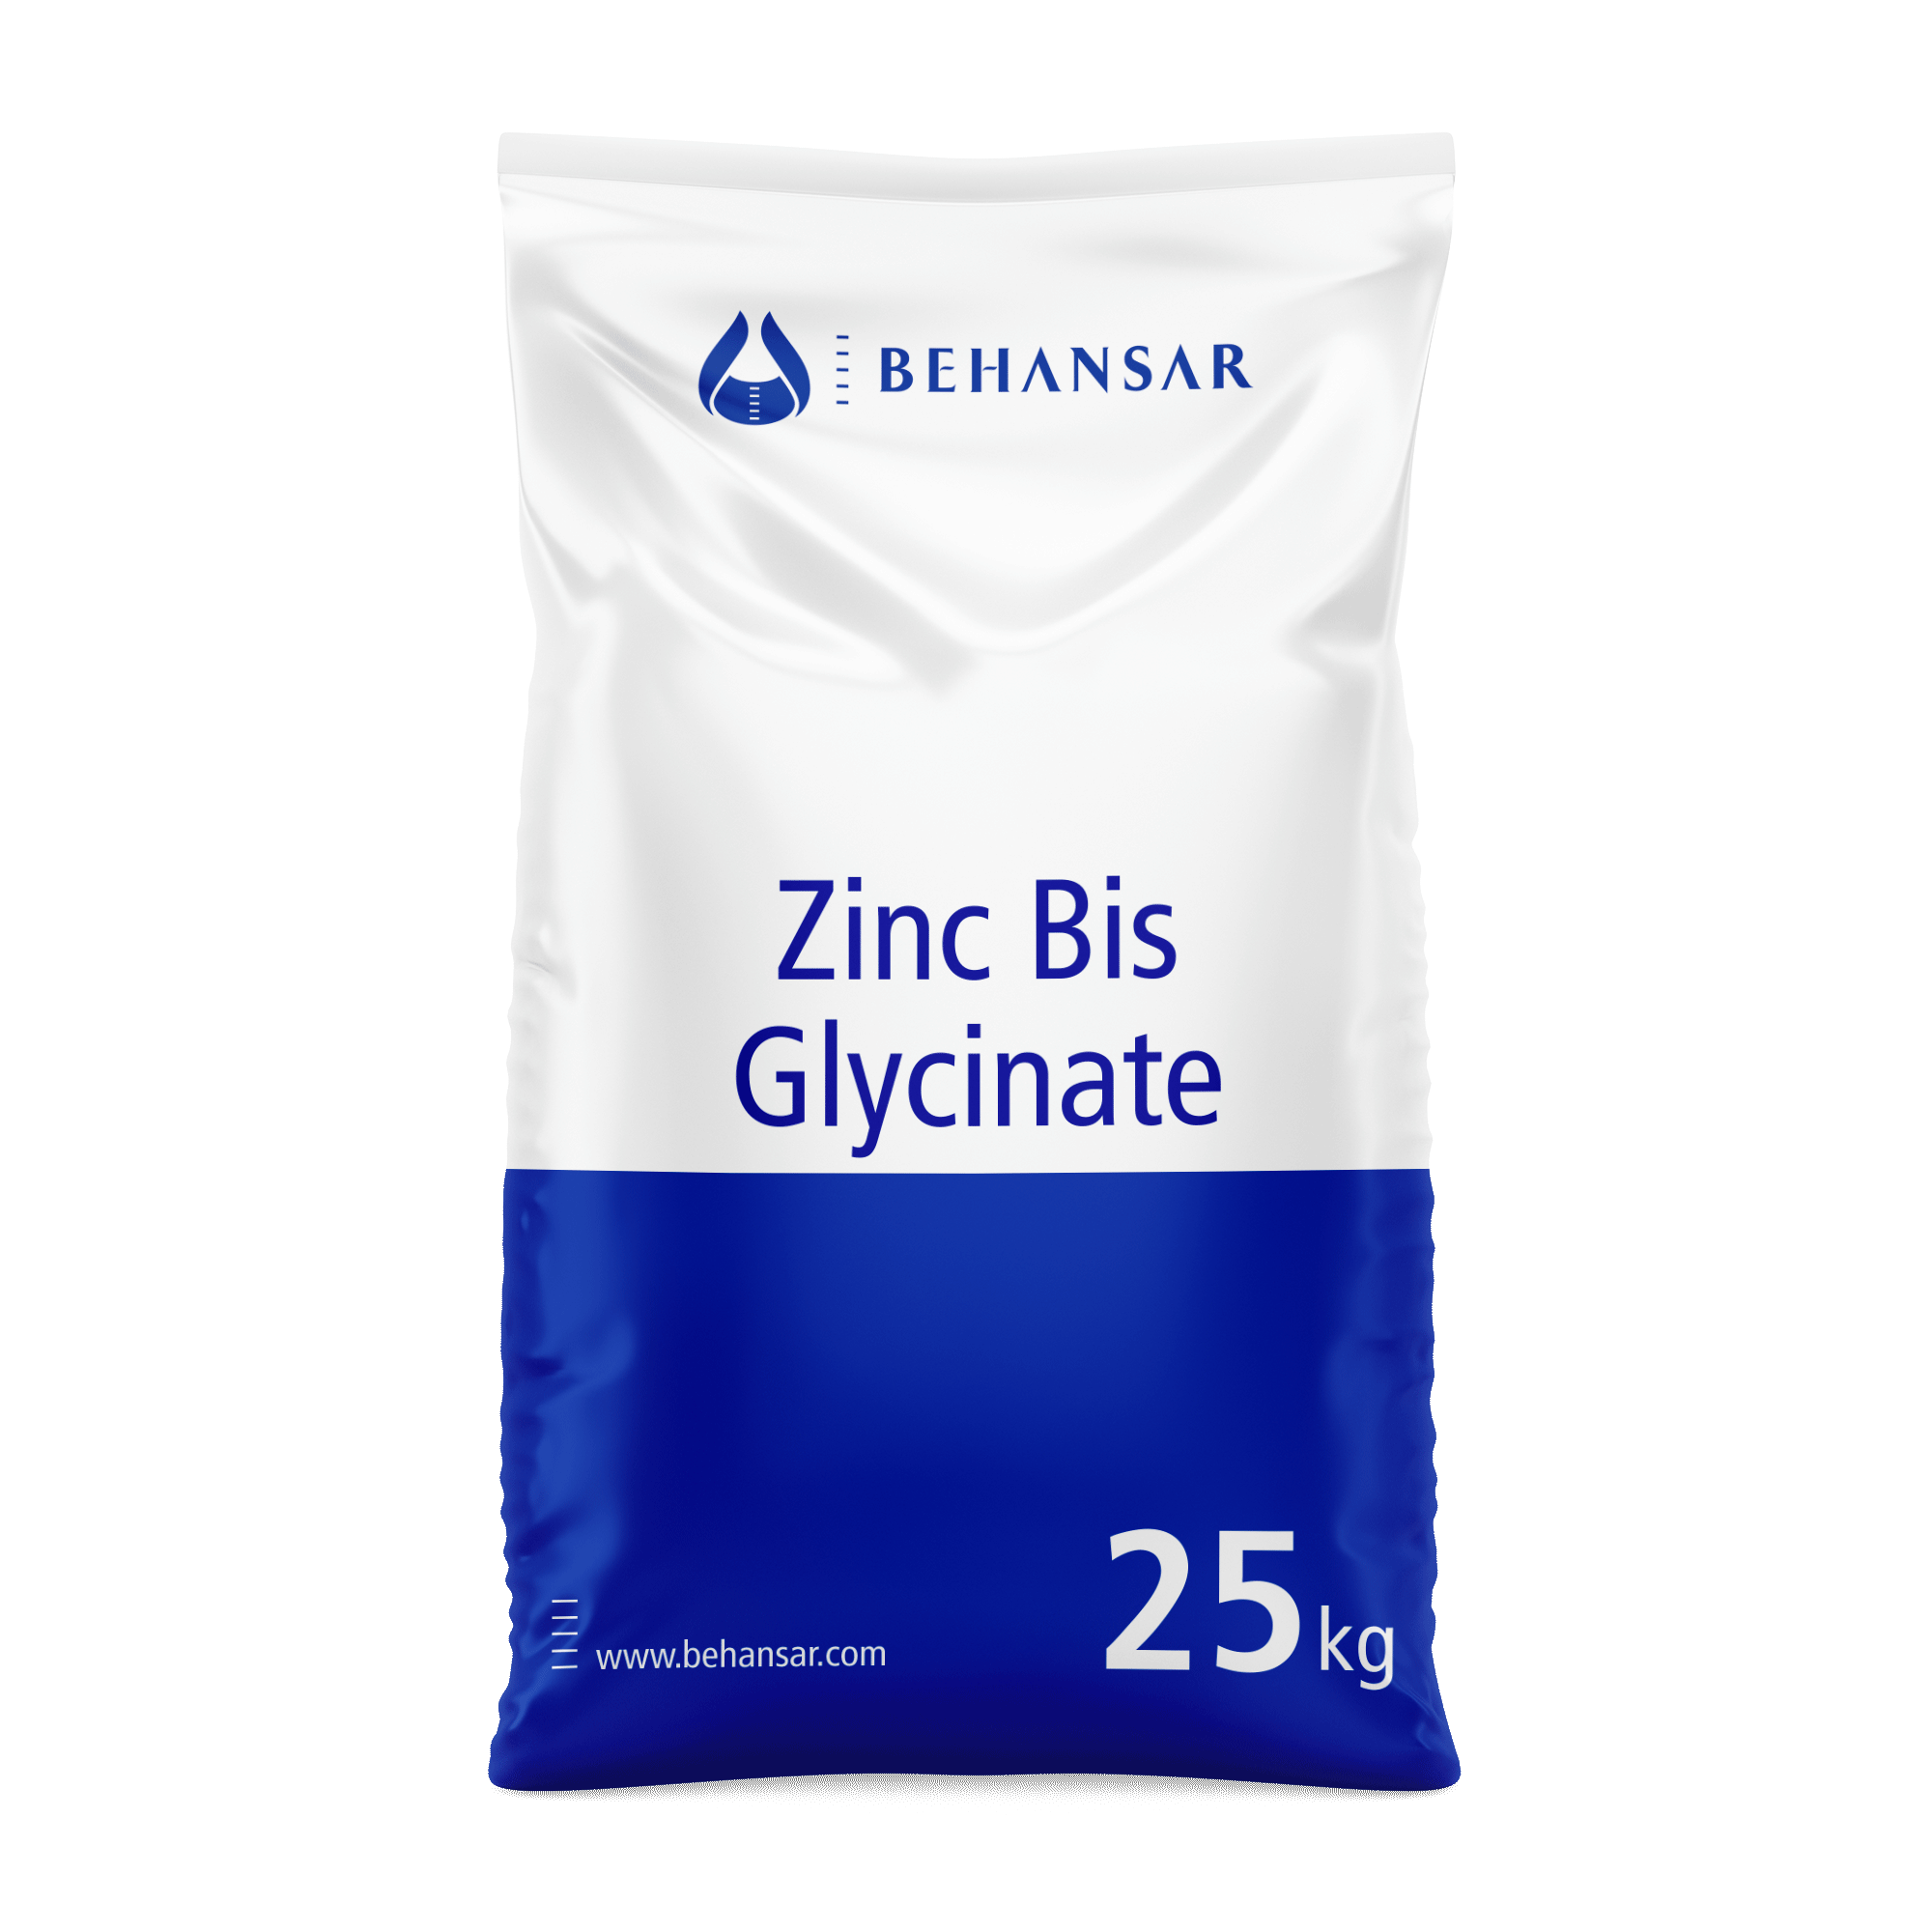 Zinc Bis Glycinate is one of the products of Behansar Co